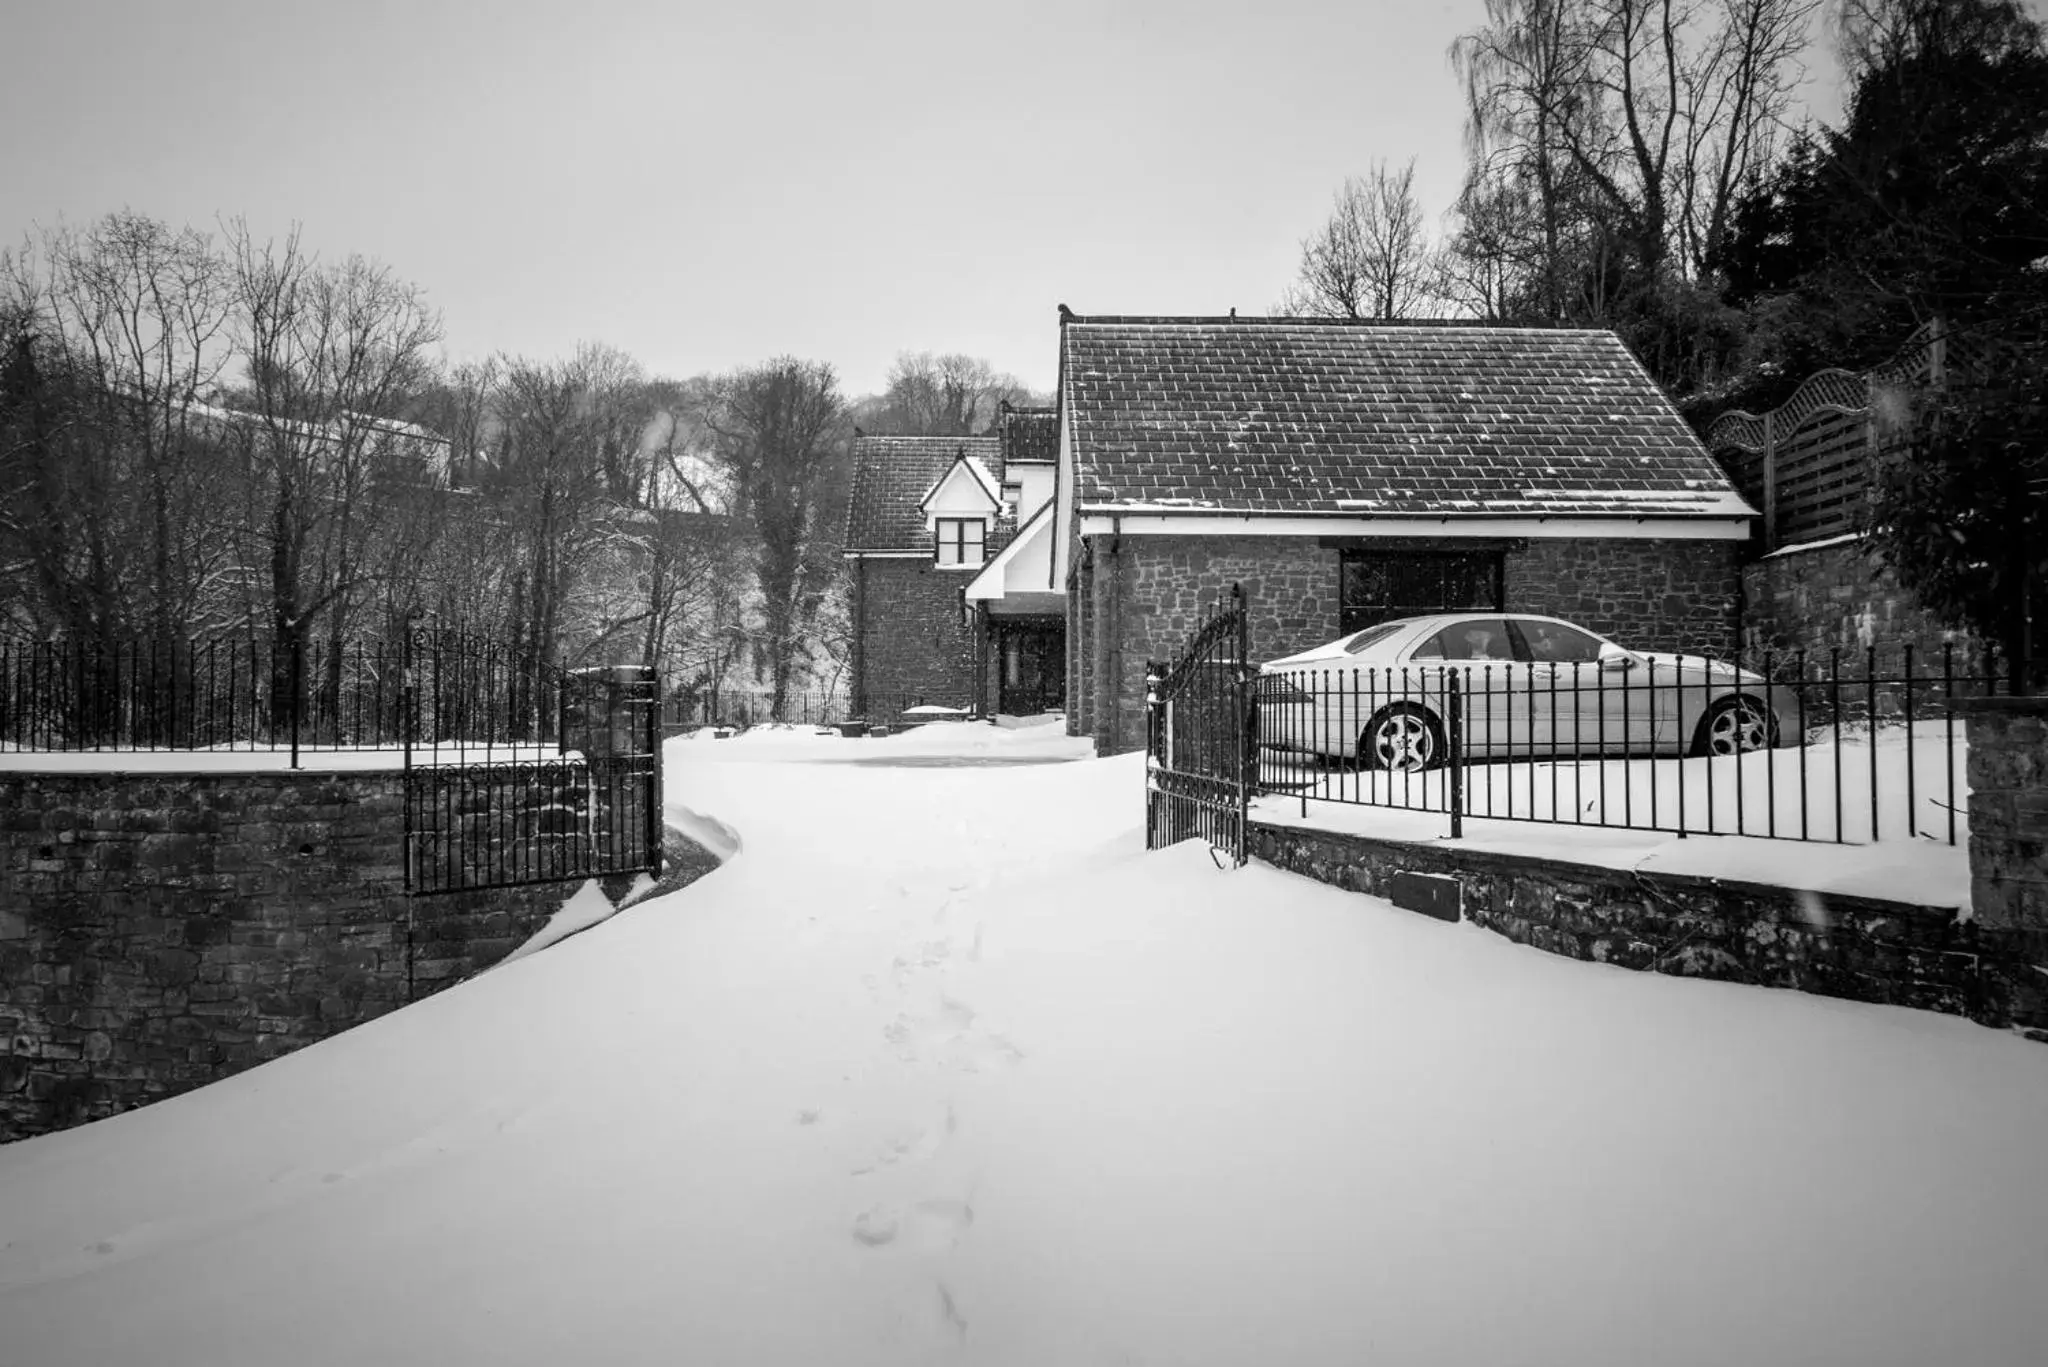 Property building, Winter in Mill Lodge-Brecon Beacons